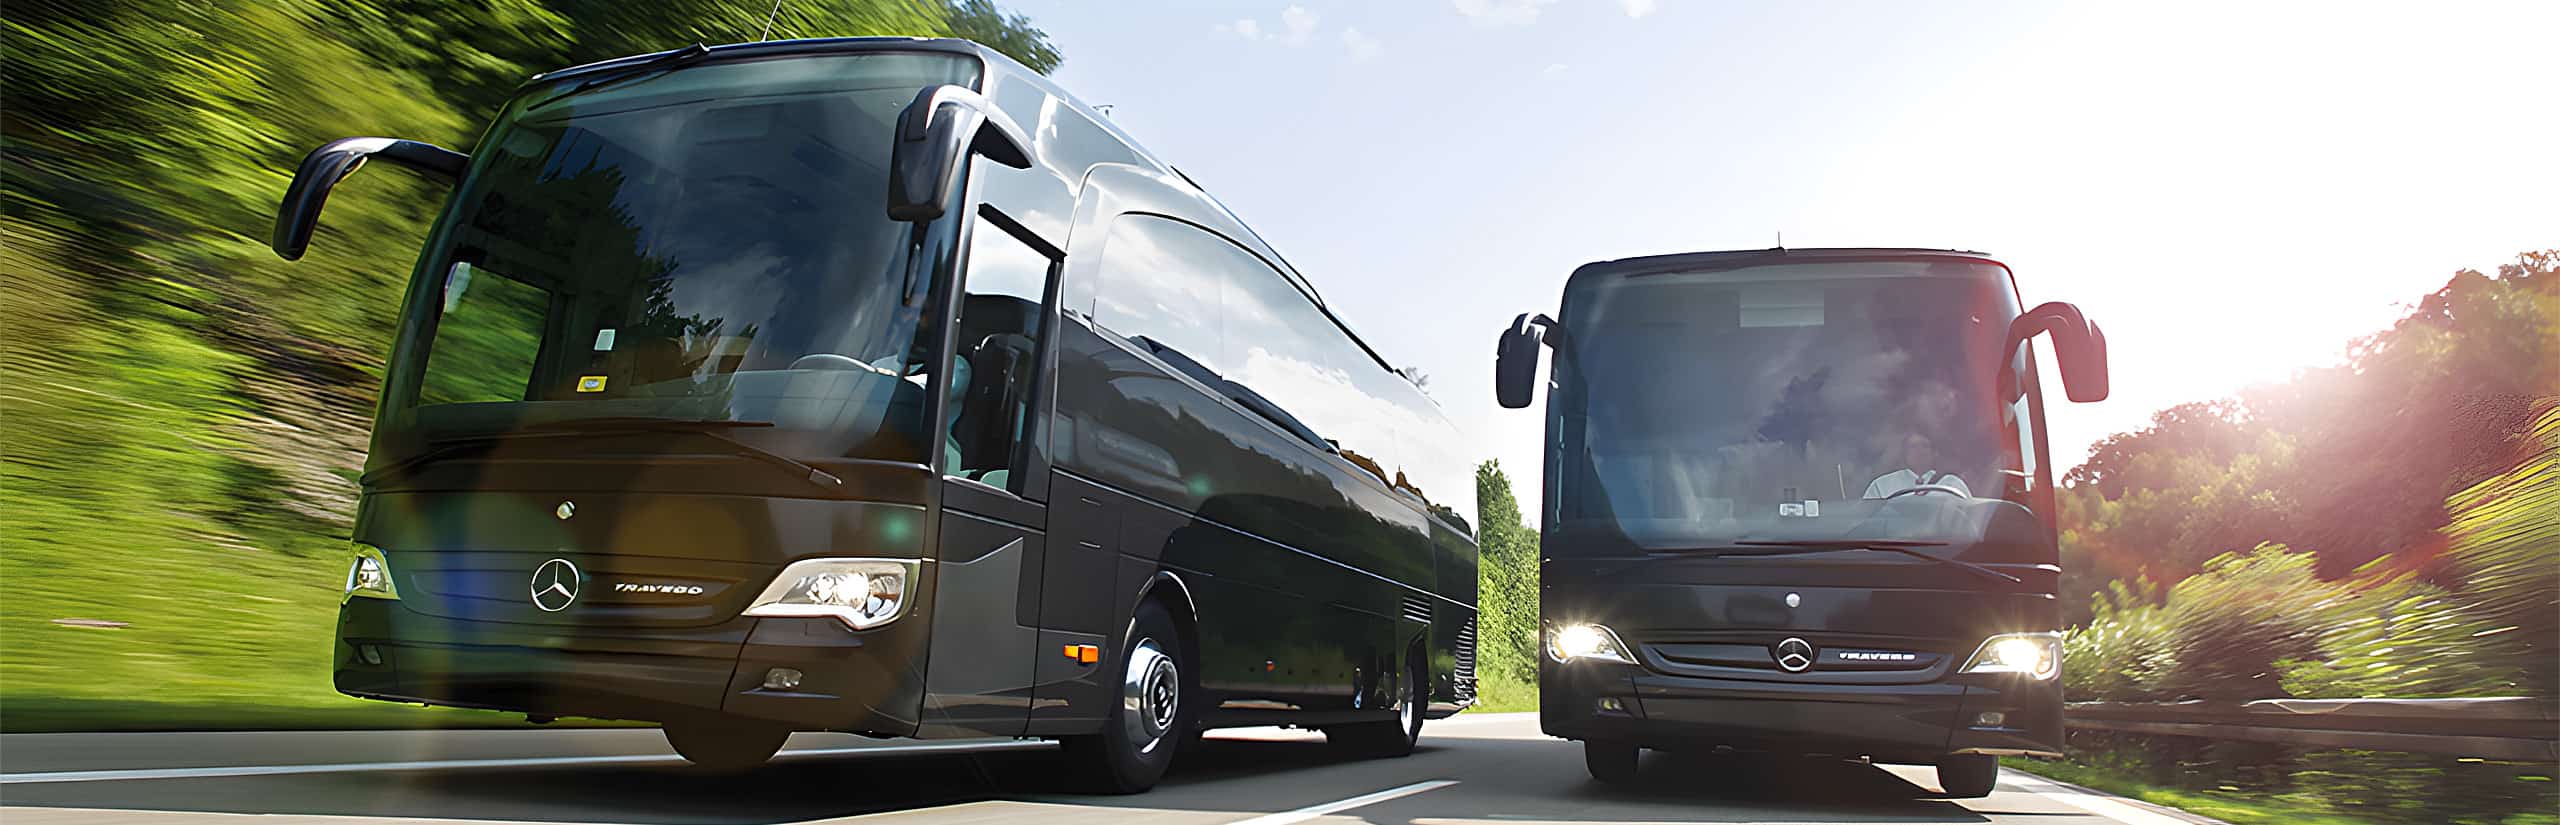 VIP and conference bus hire in Munich for 24 people